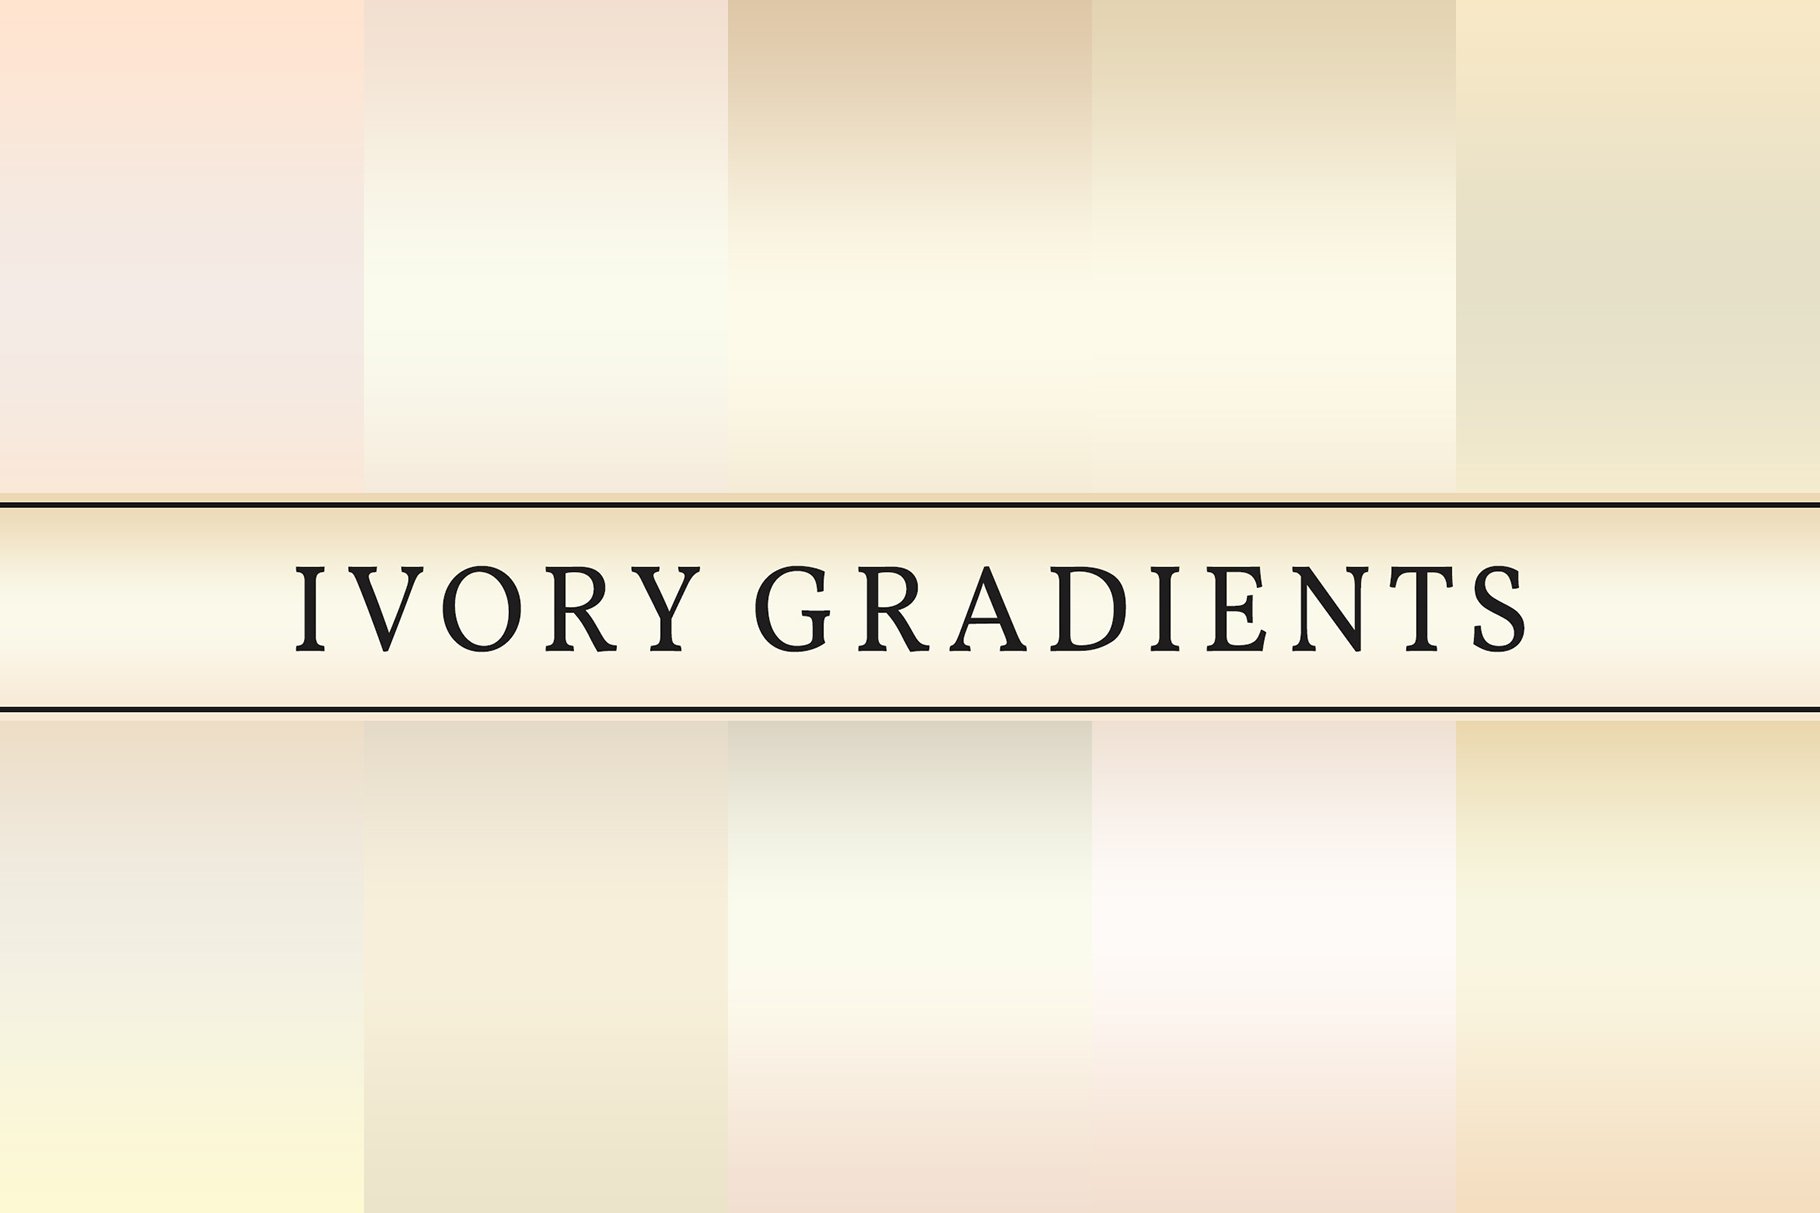 Ivory Gradientscover image.